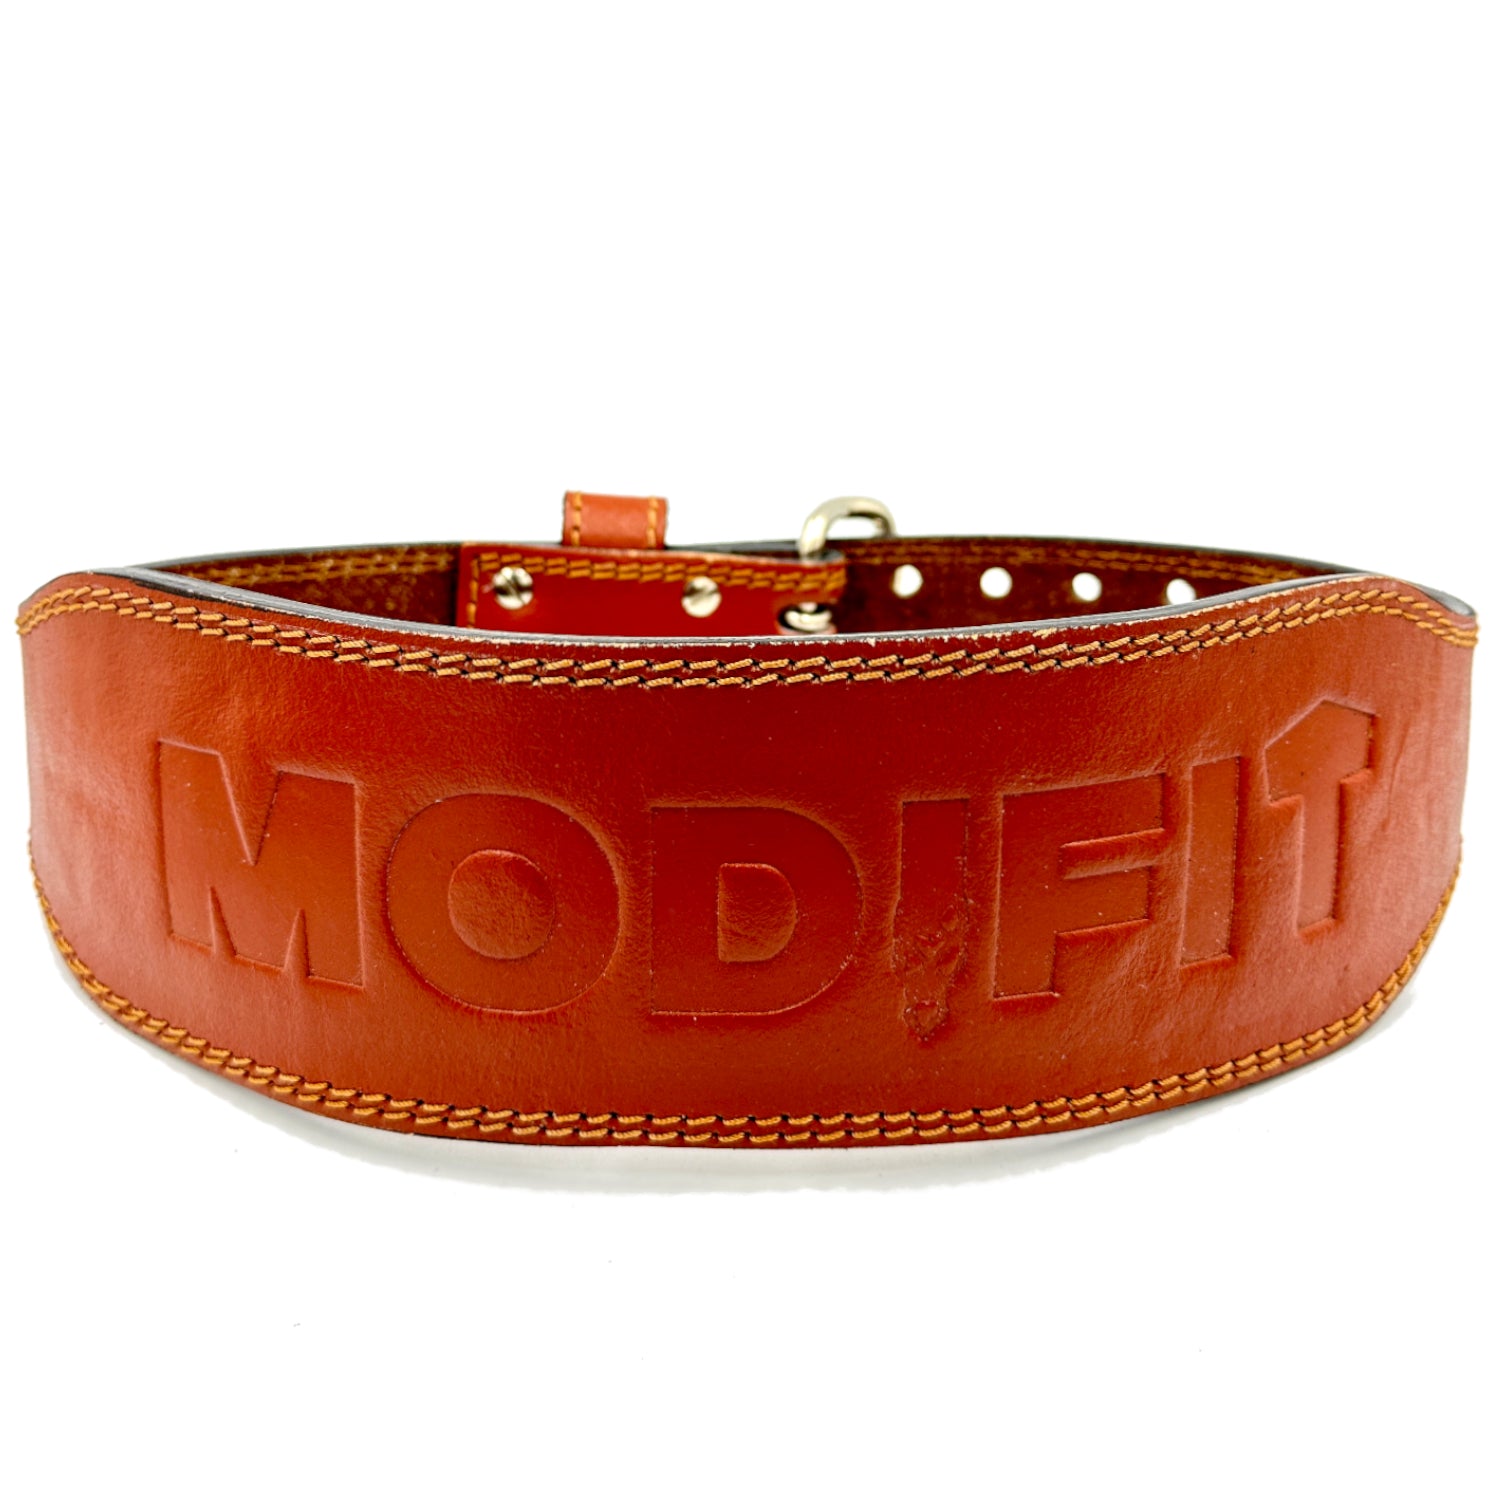 ModiFit Leather Weightlifting Belt Classic Edition